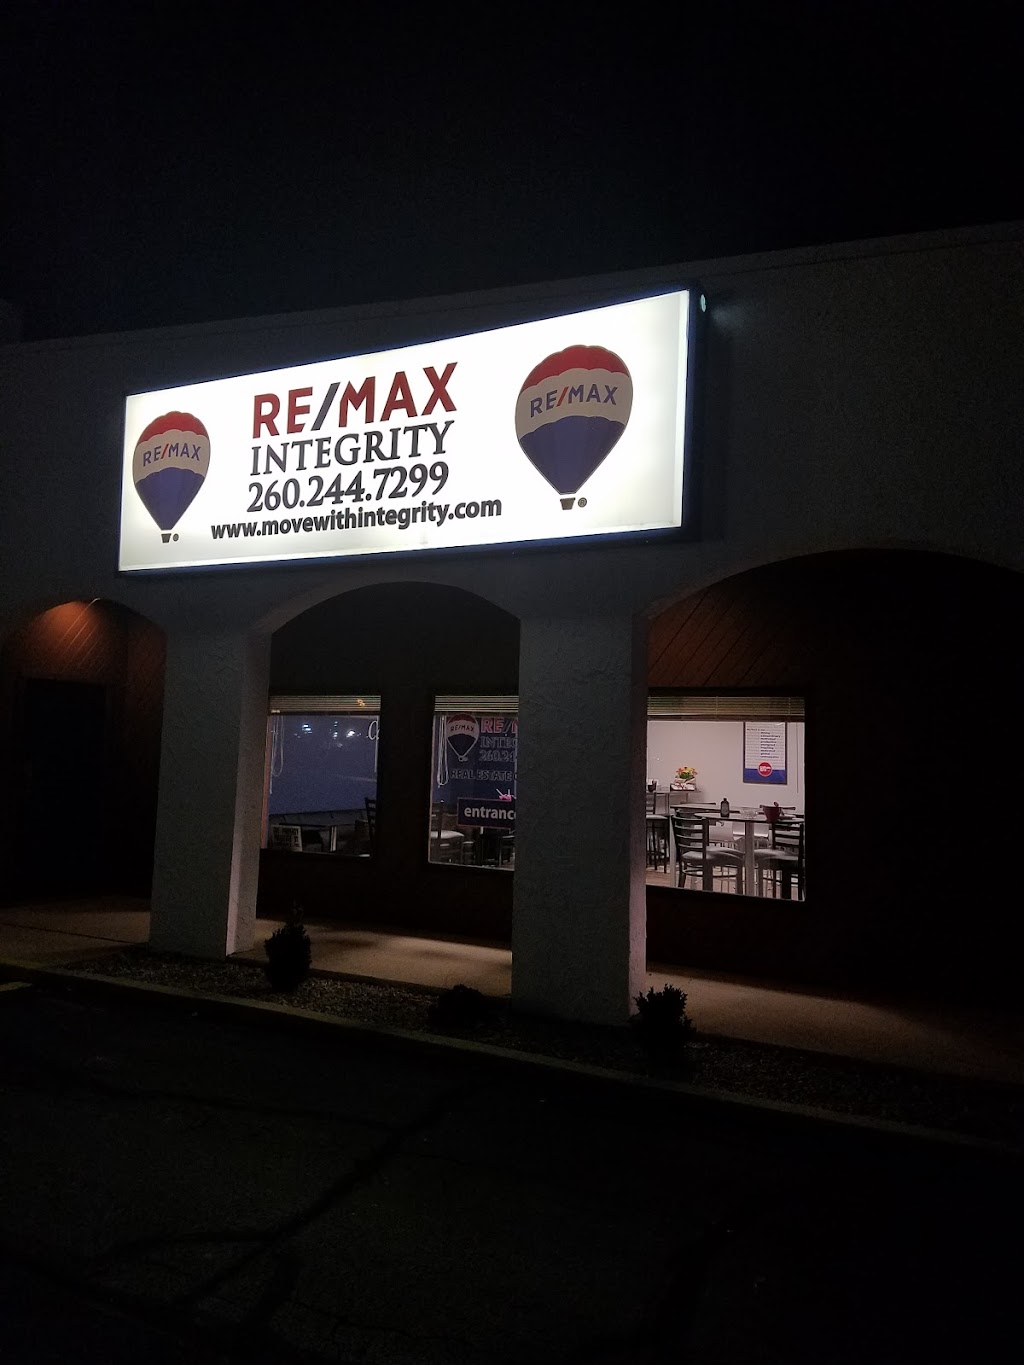 RE/MAX Integrity | 220 Frontage Rd Suite C, Columbia City, IN 46725 | Phone: (260) 244-7299